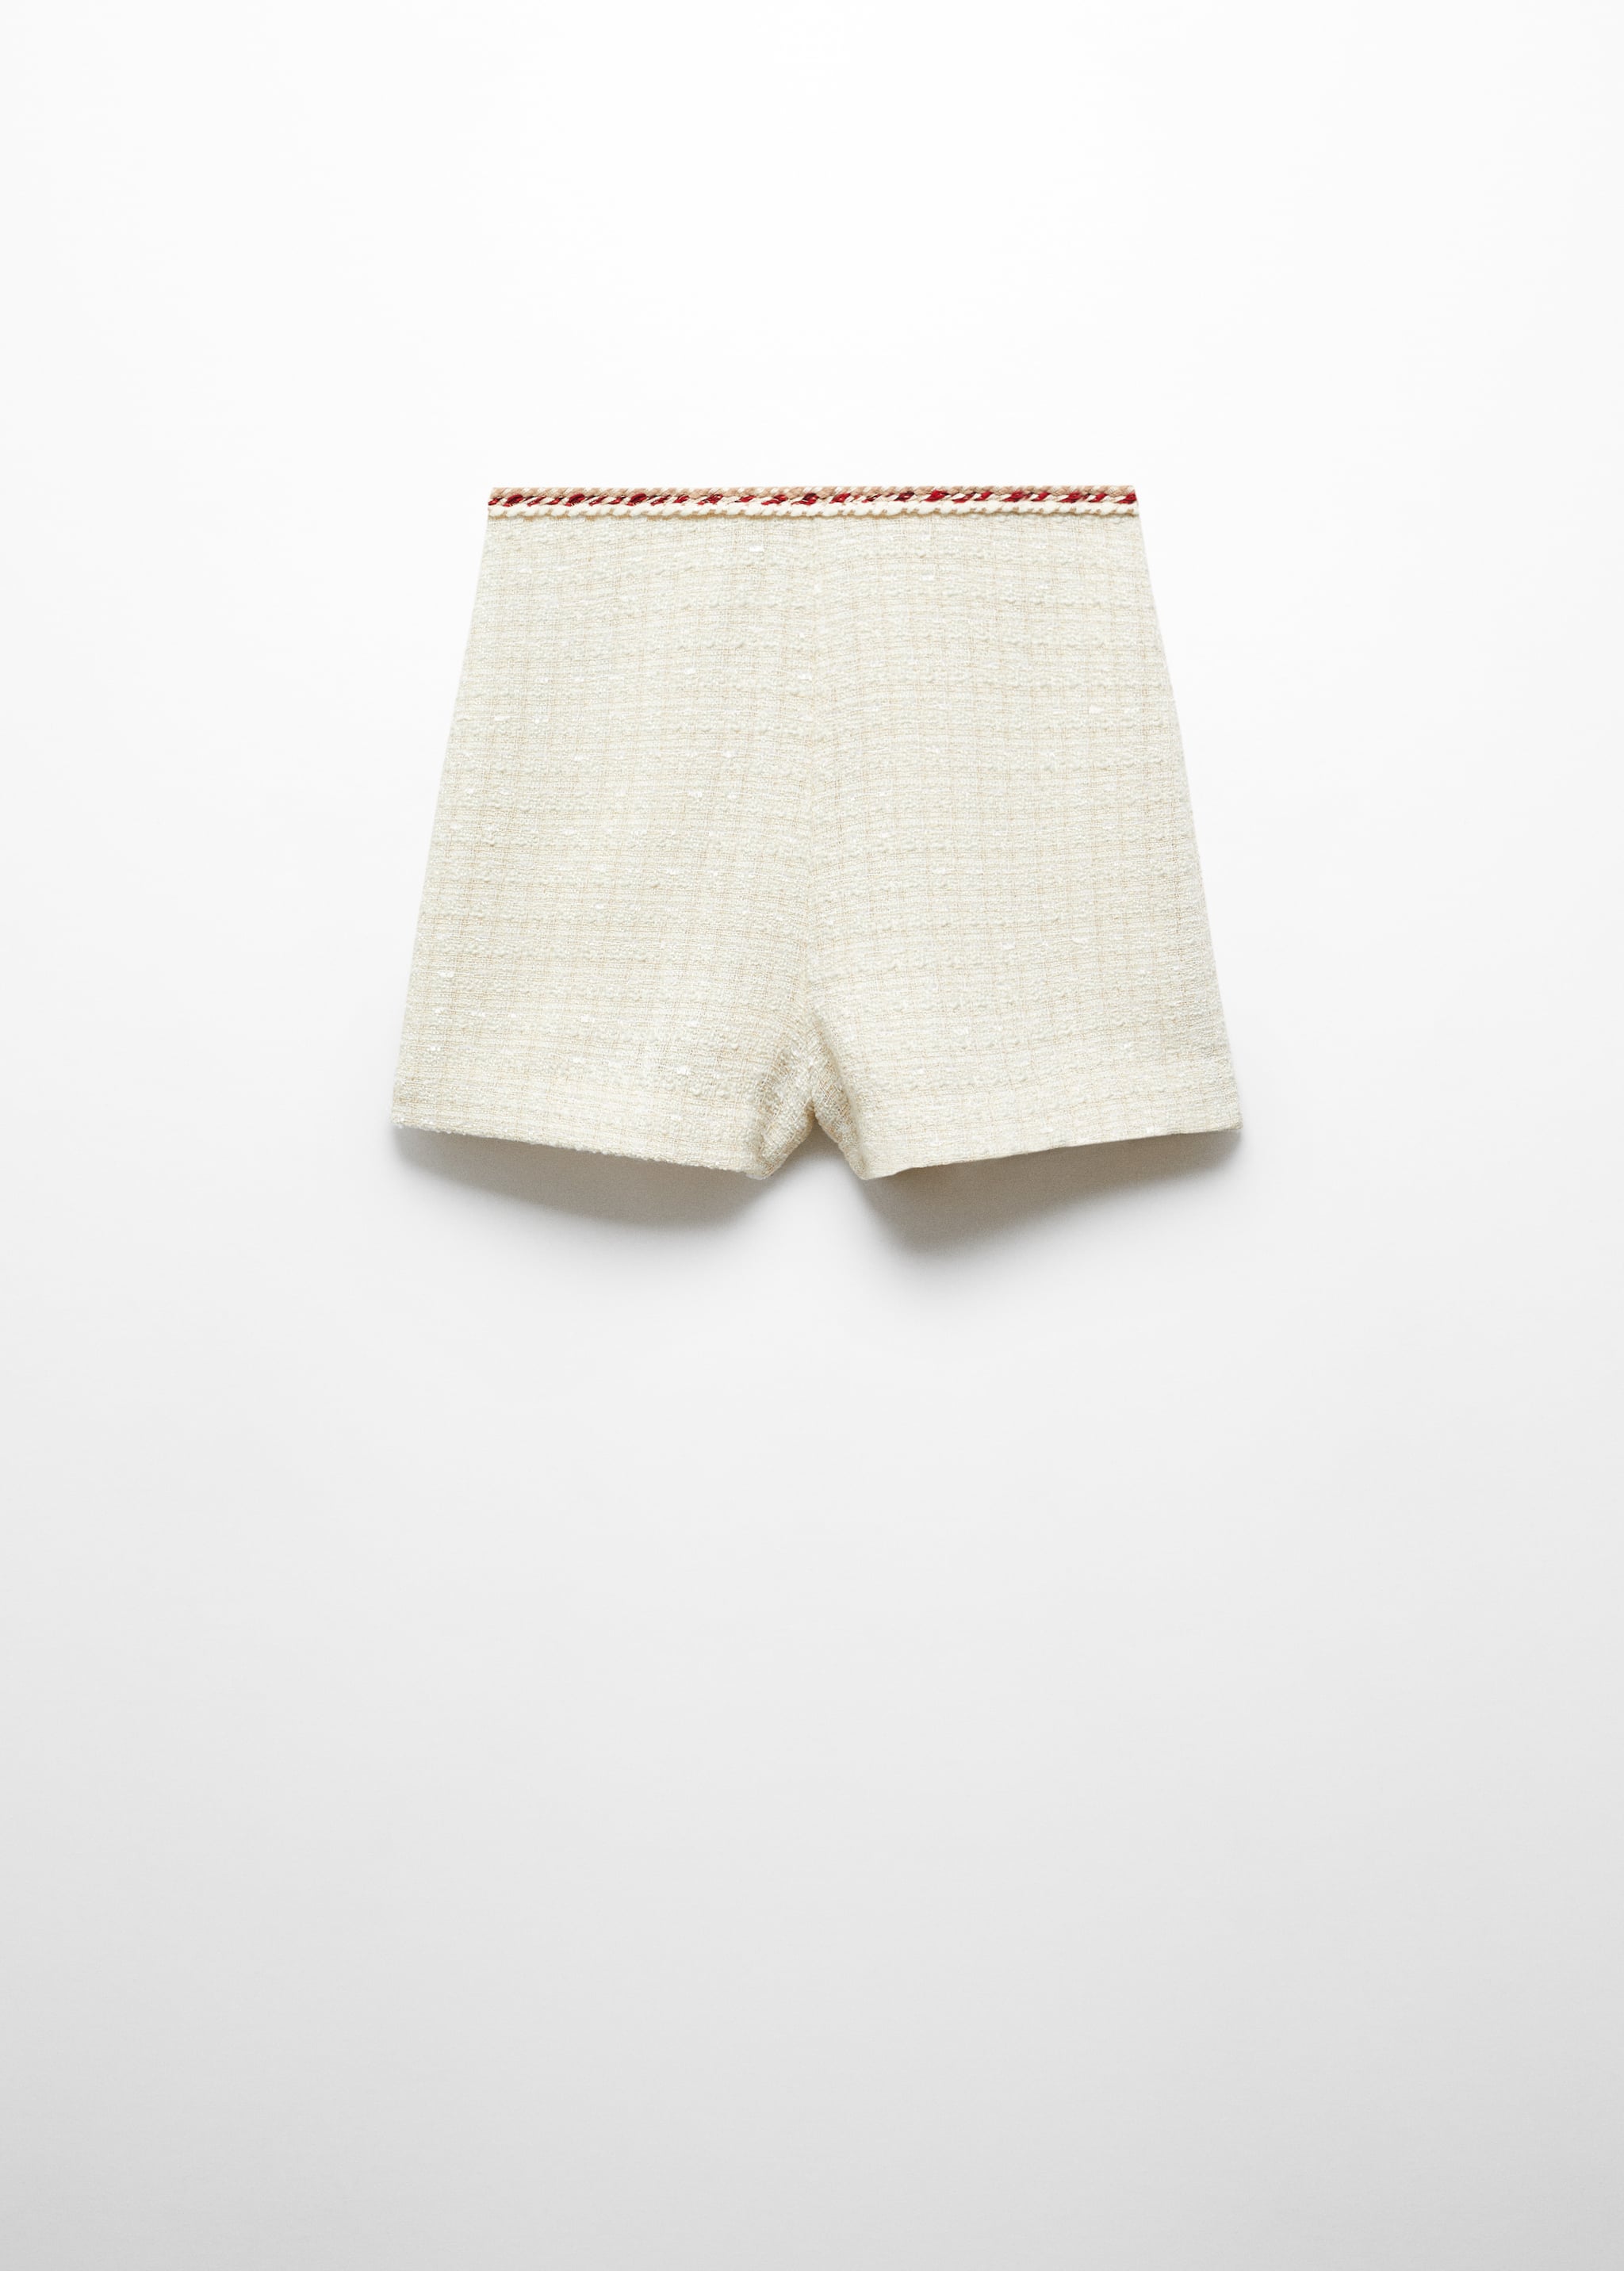 Tweed trim shorts - Article without model